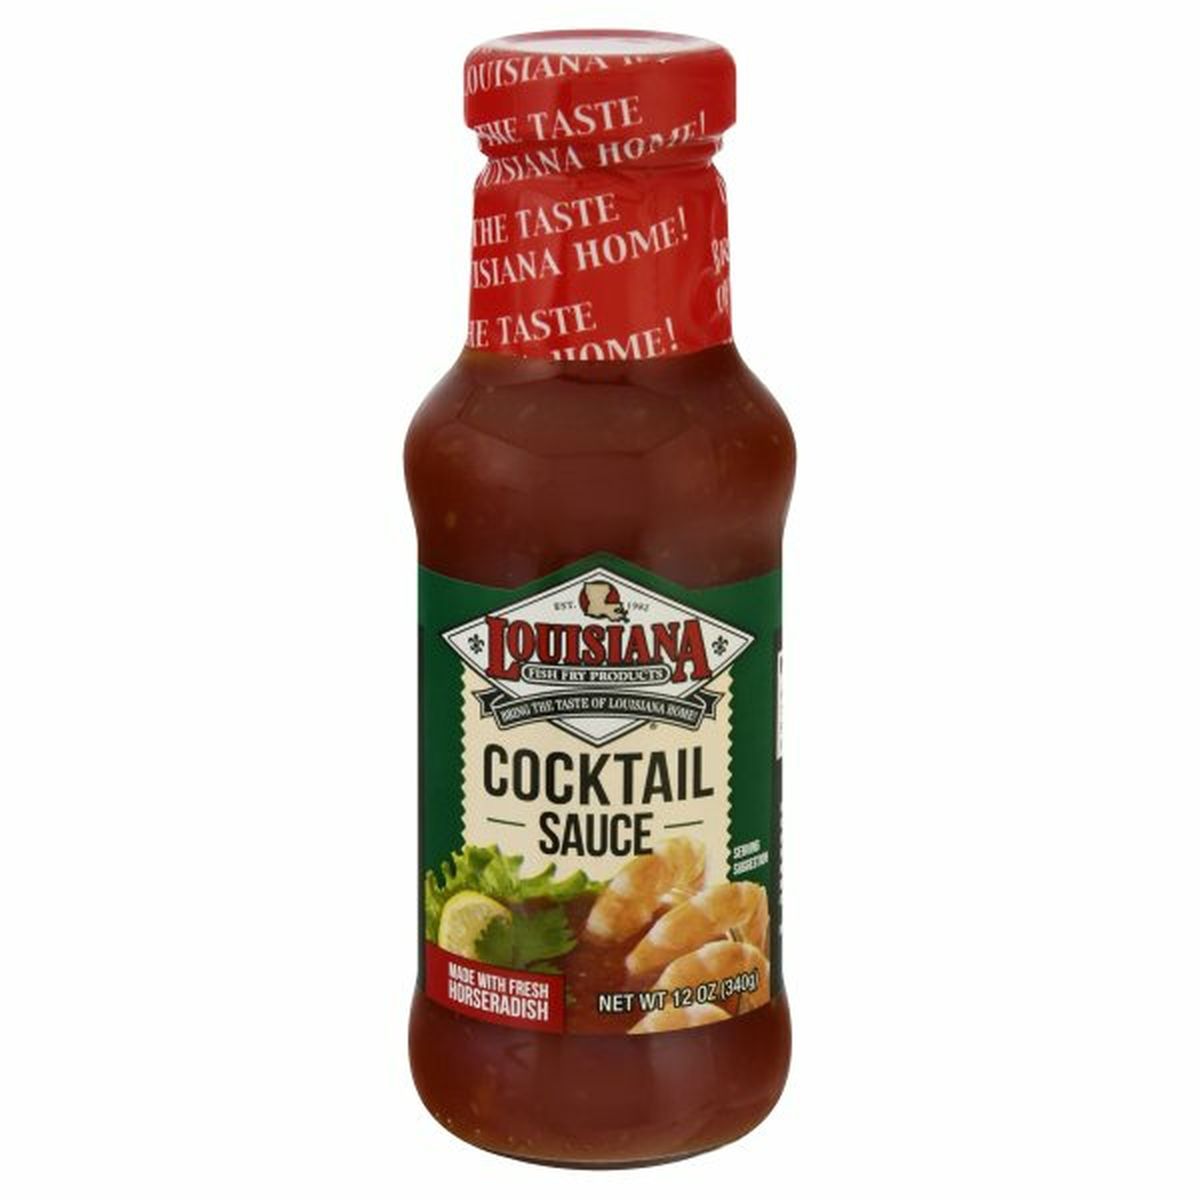 Calories in Louisiana Fish Fry Products Cocktail Sauce